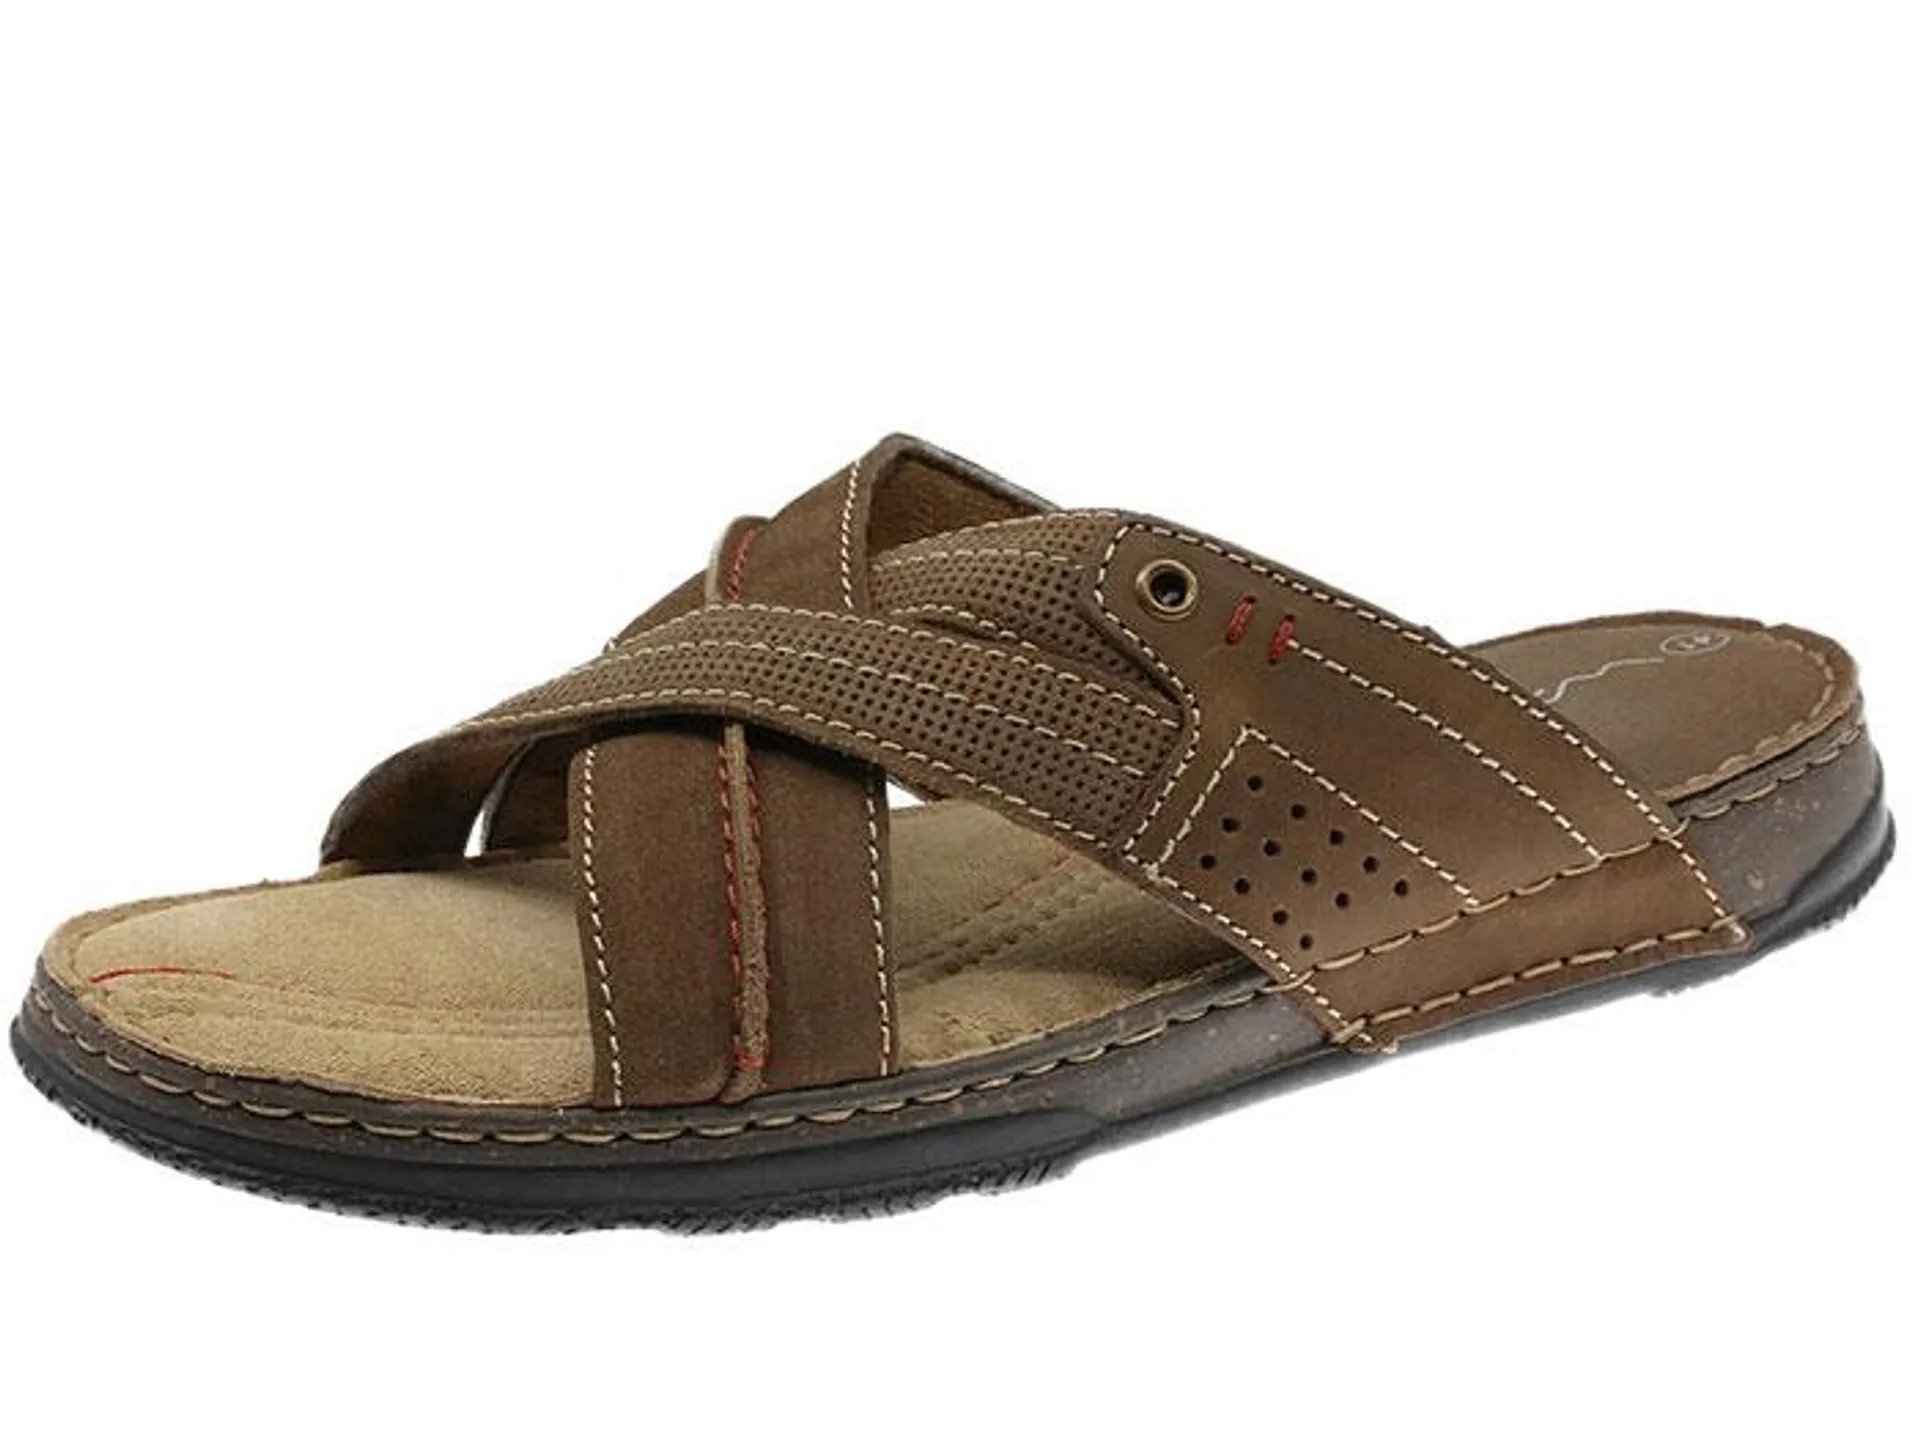 Casual slipper for man